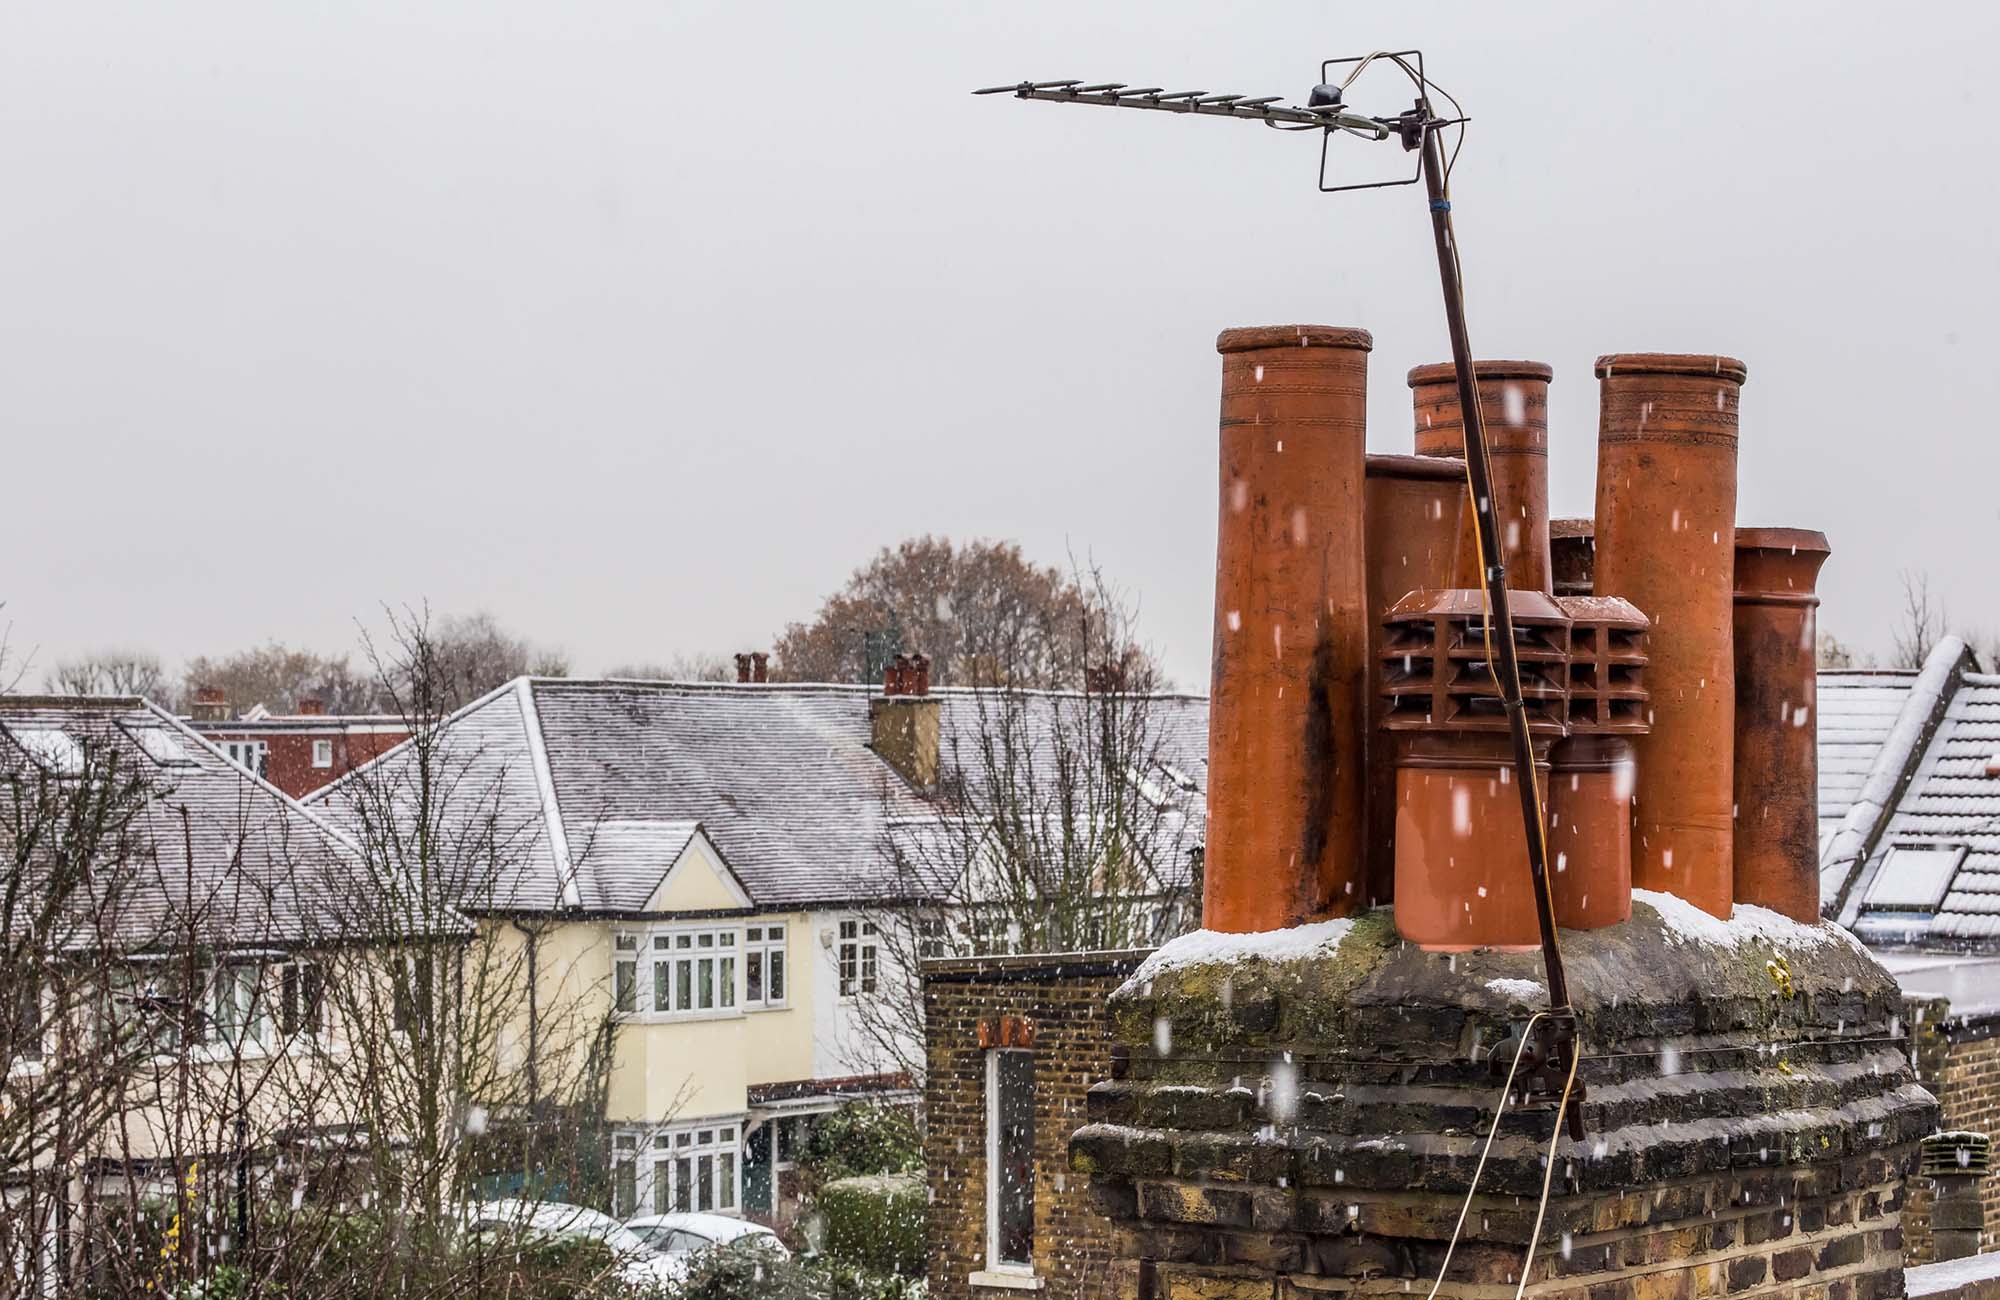 Suburb chimney stack on snowy winter day, UK